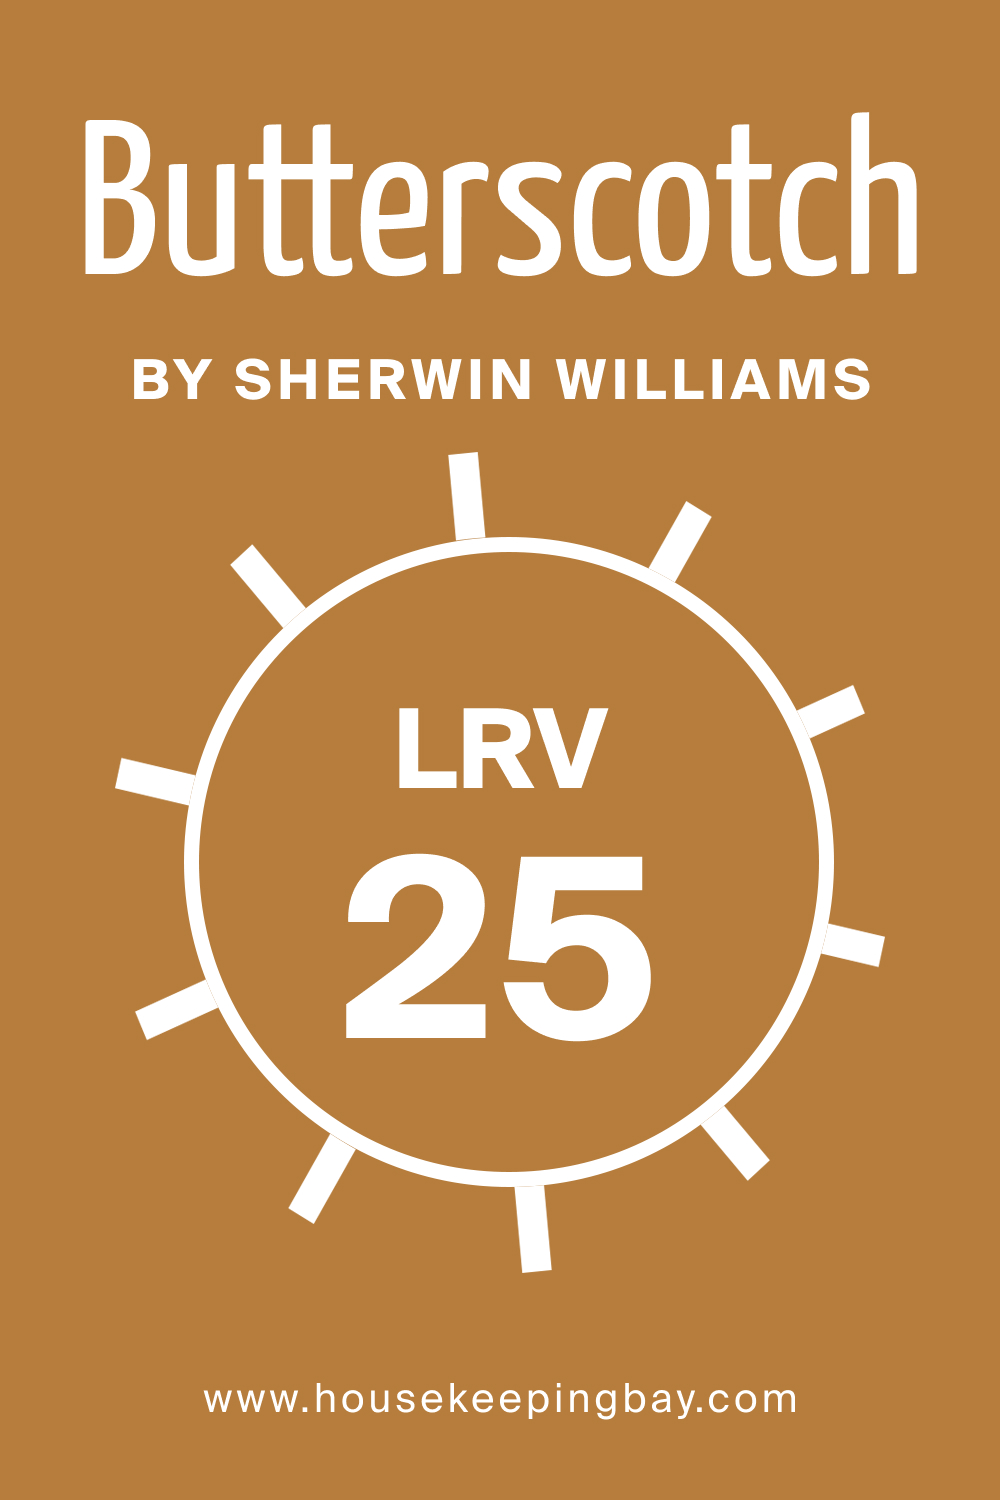 SW 6377 Butterscotch by Sherwin Williams. LRV 25